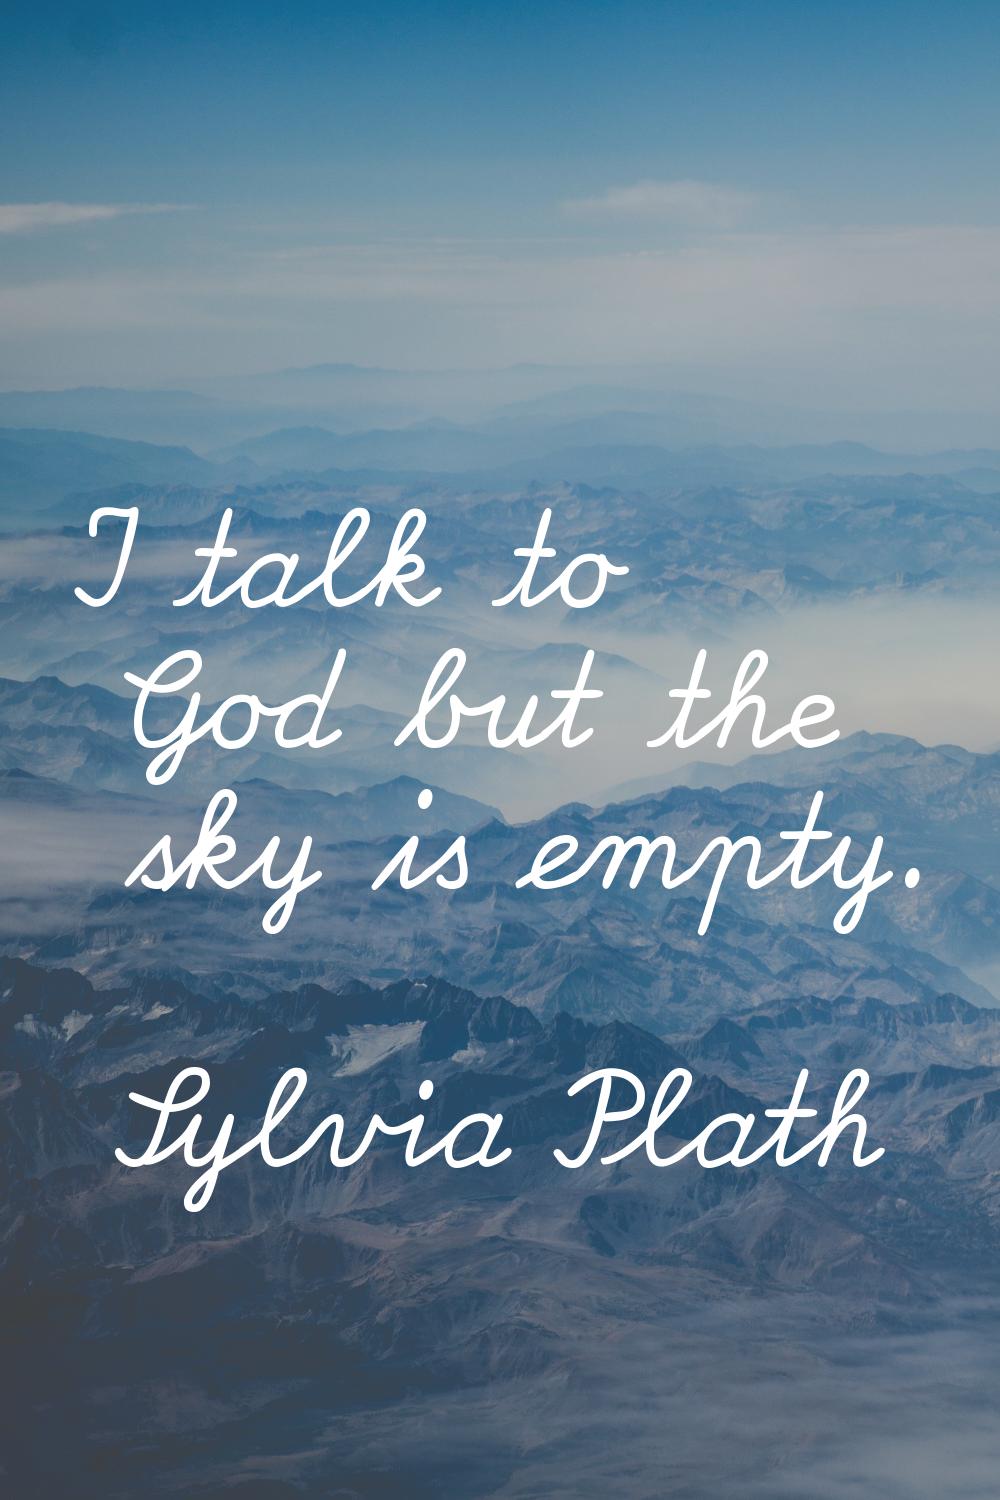 I talk to God but the sky is empty.